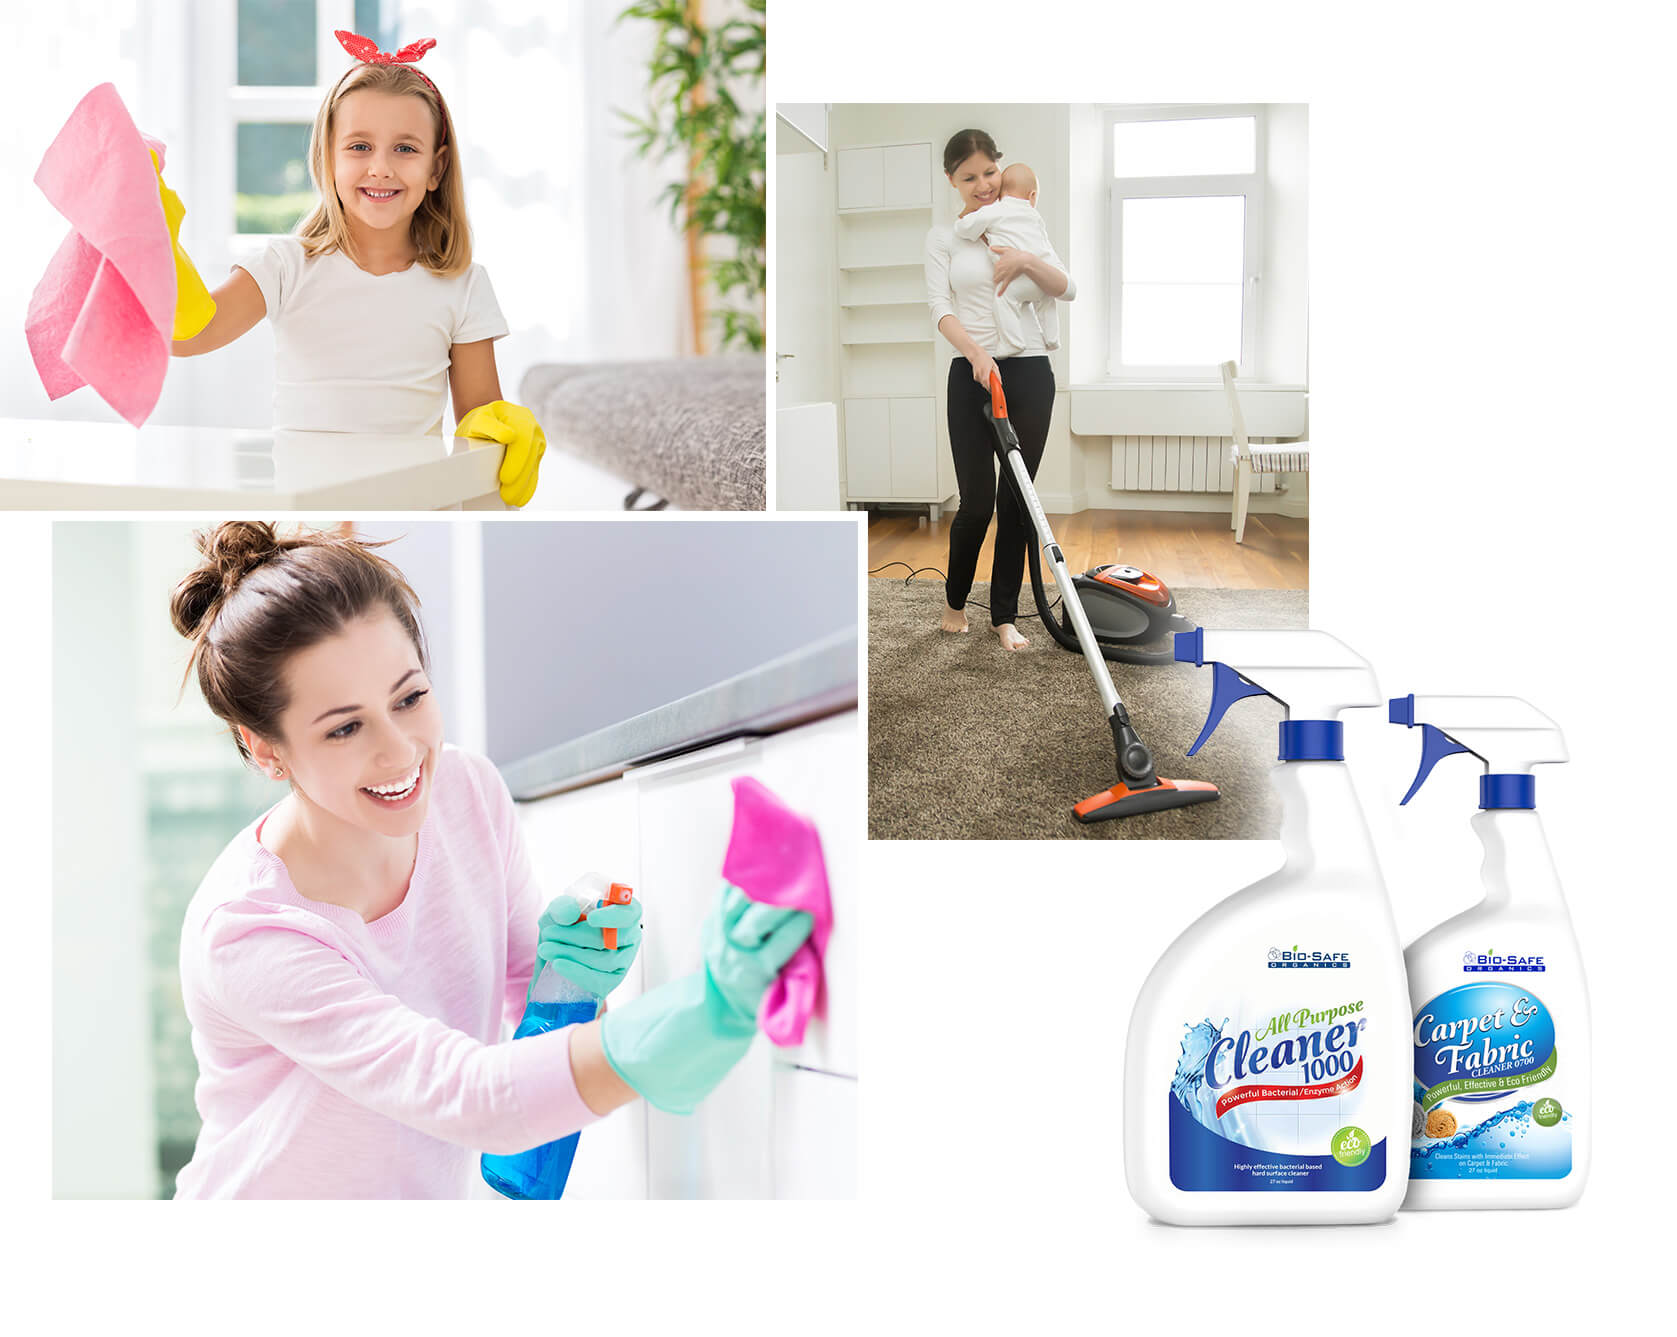 Household Cleaners